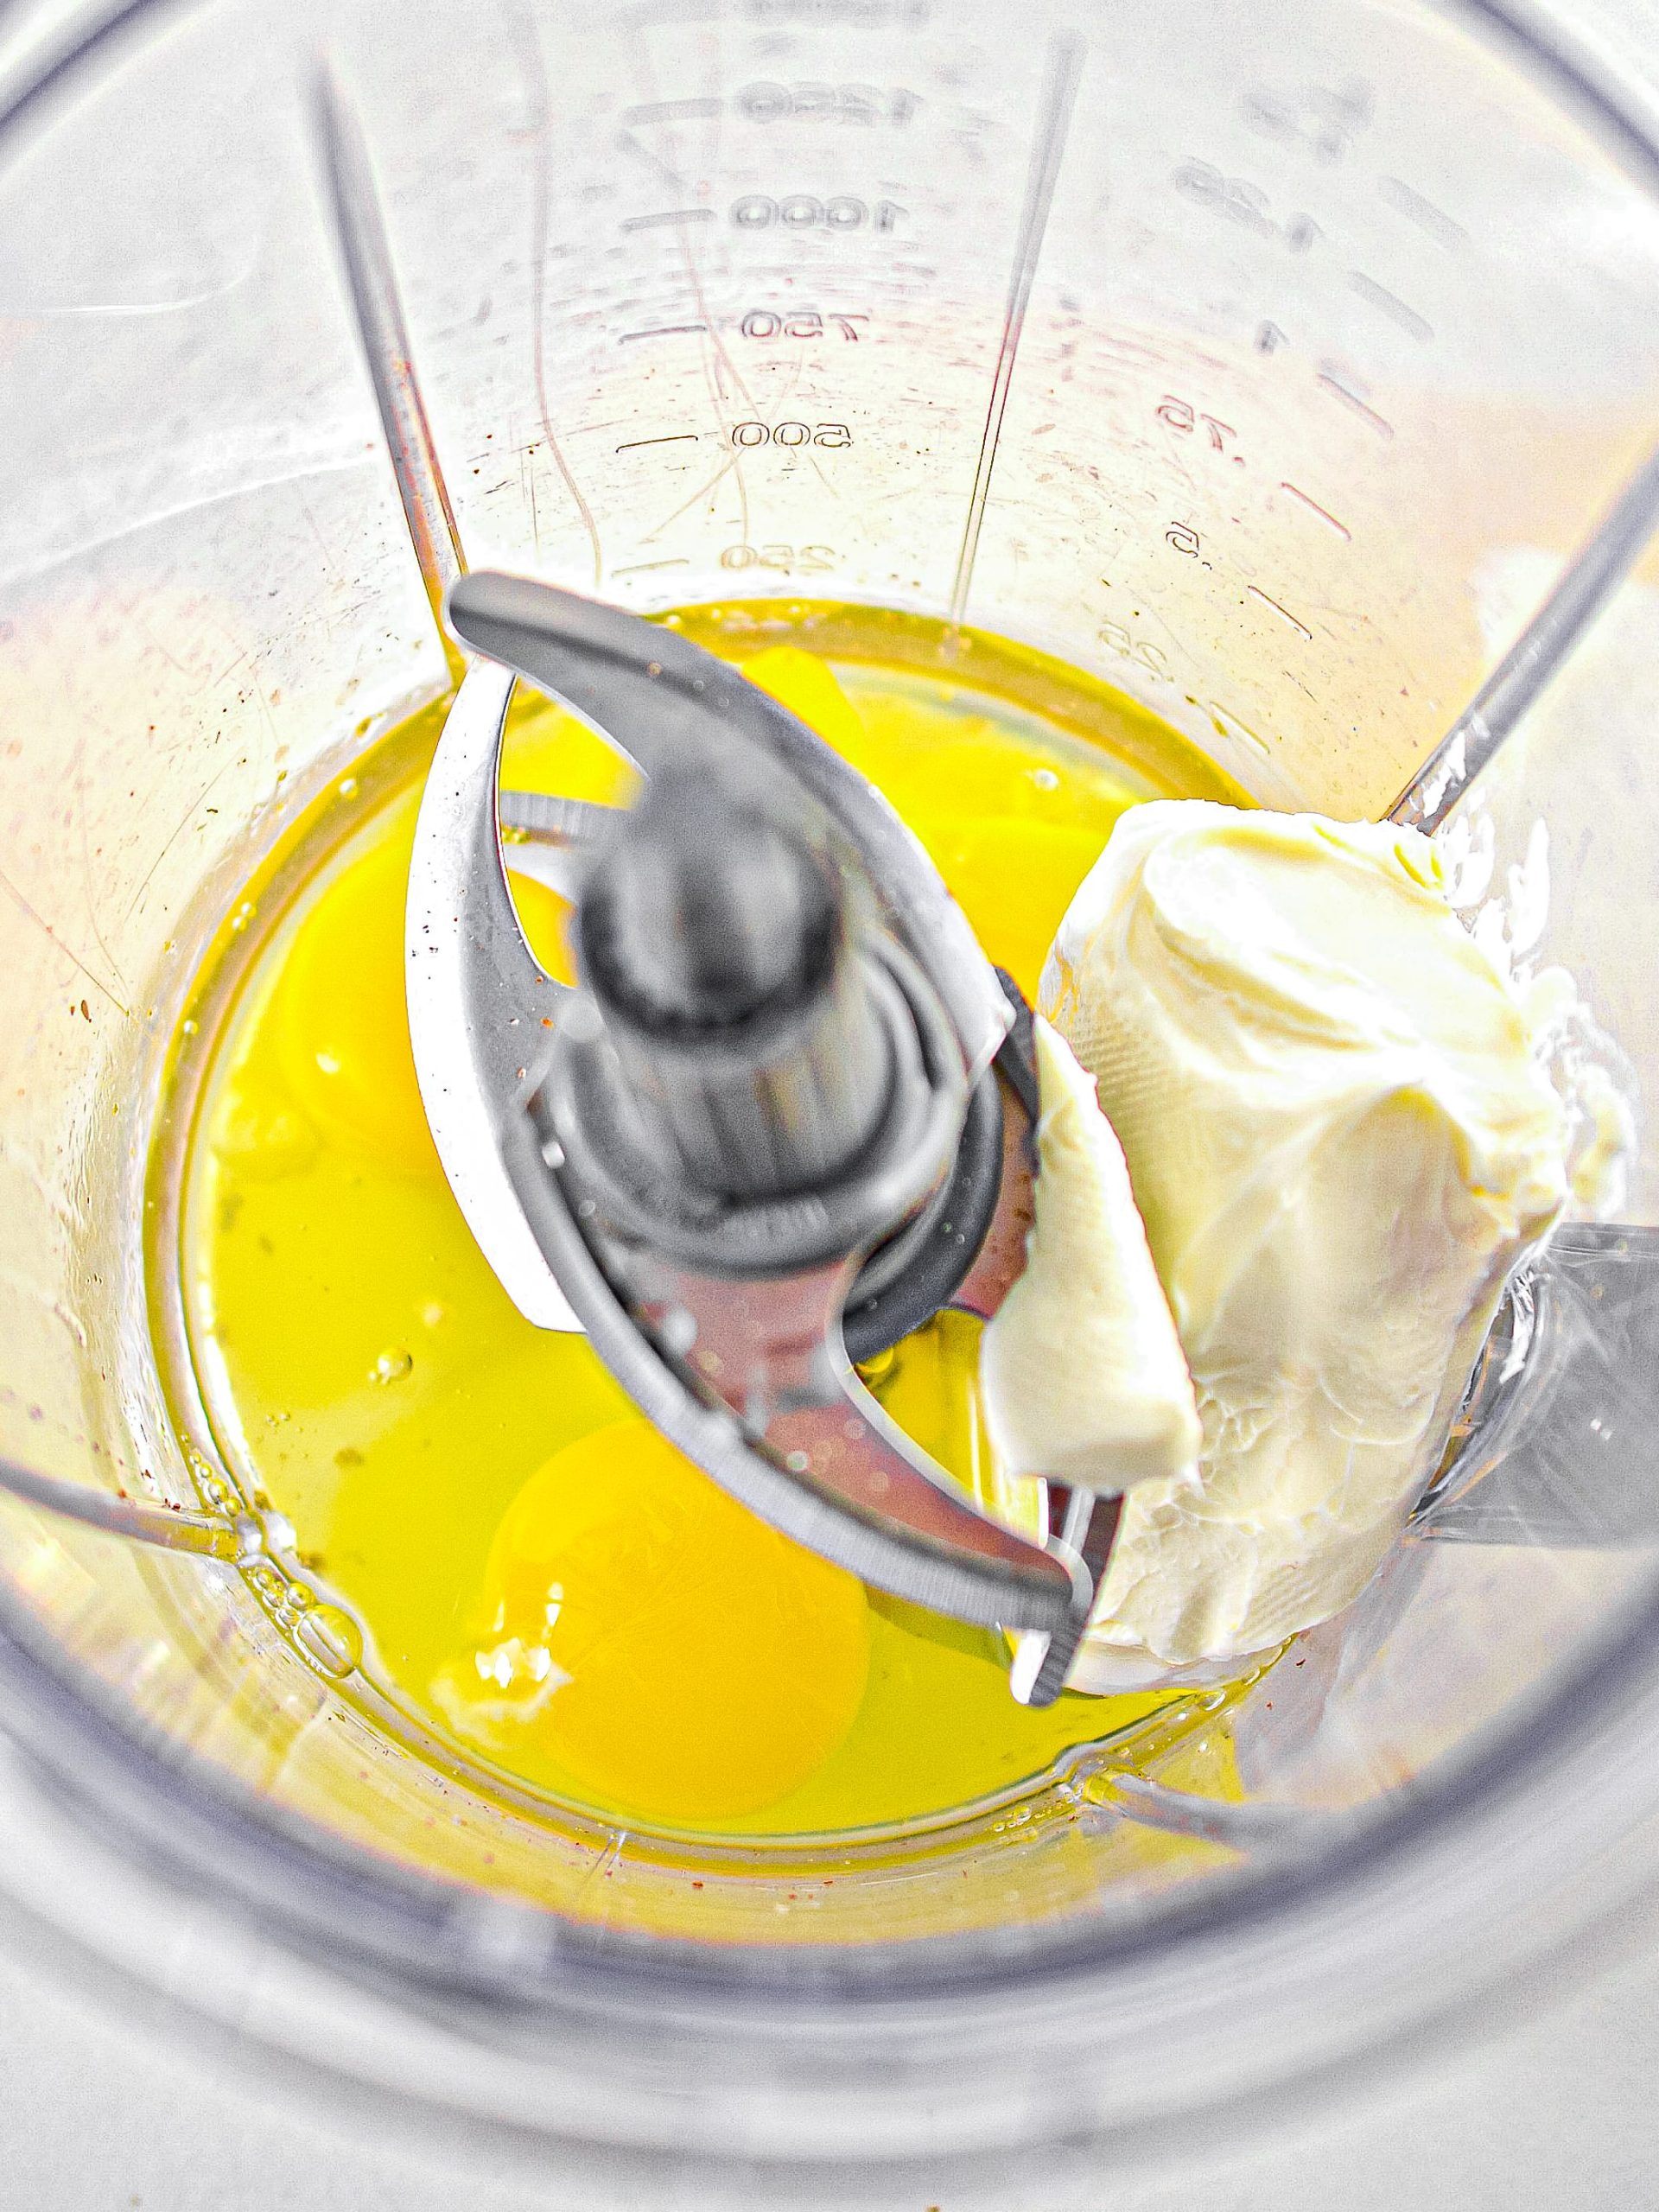 Add all of the ingredients to a blender or food processor, and blend until smooth and creamy.